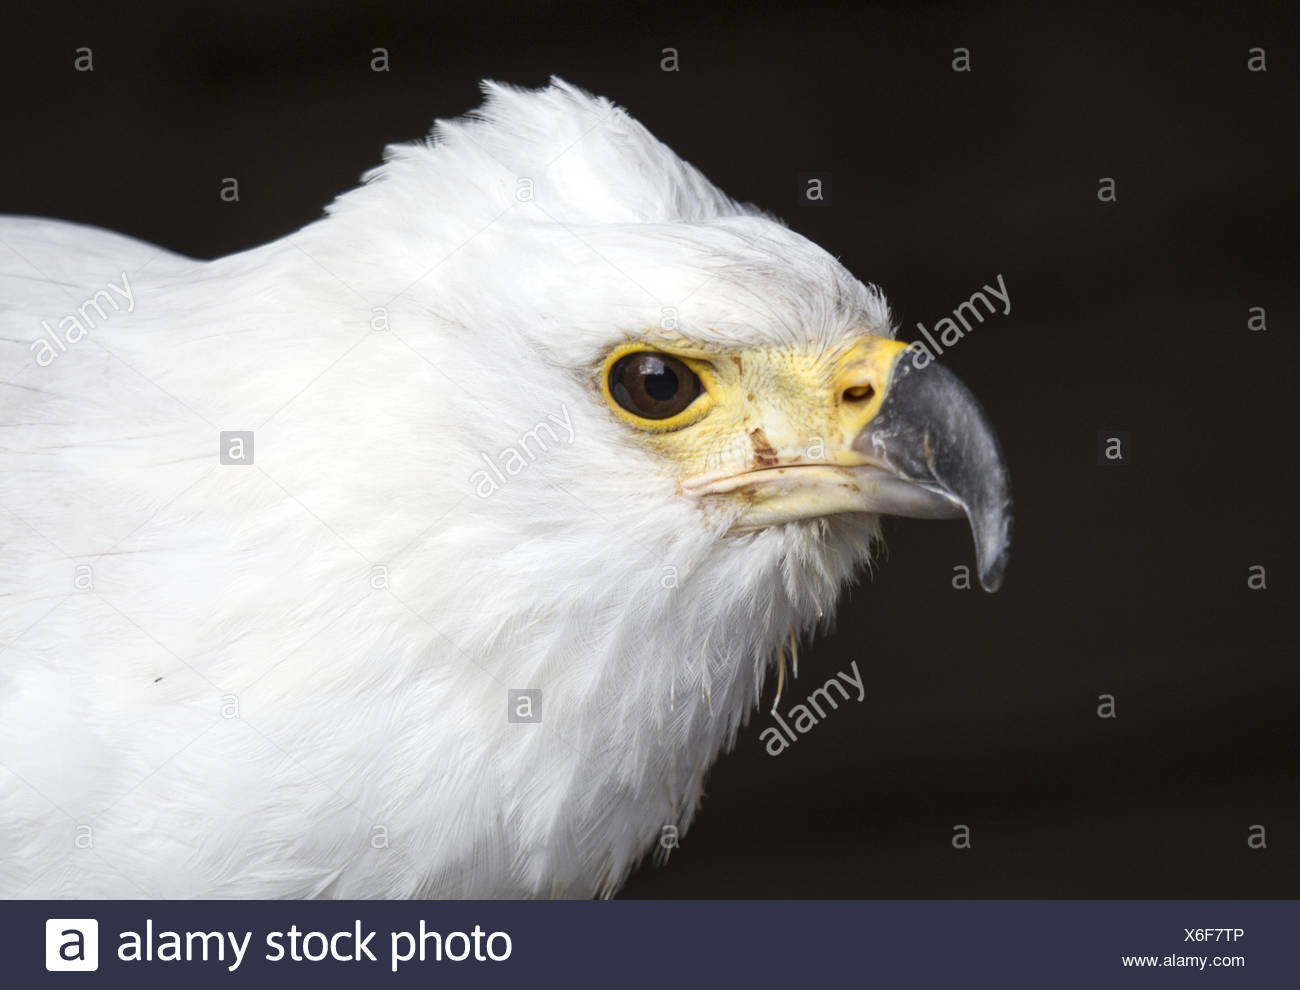 Afrikanischer Greifvogel High Resolution Stock Photography and Images -  Alamy